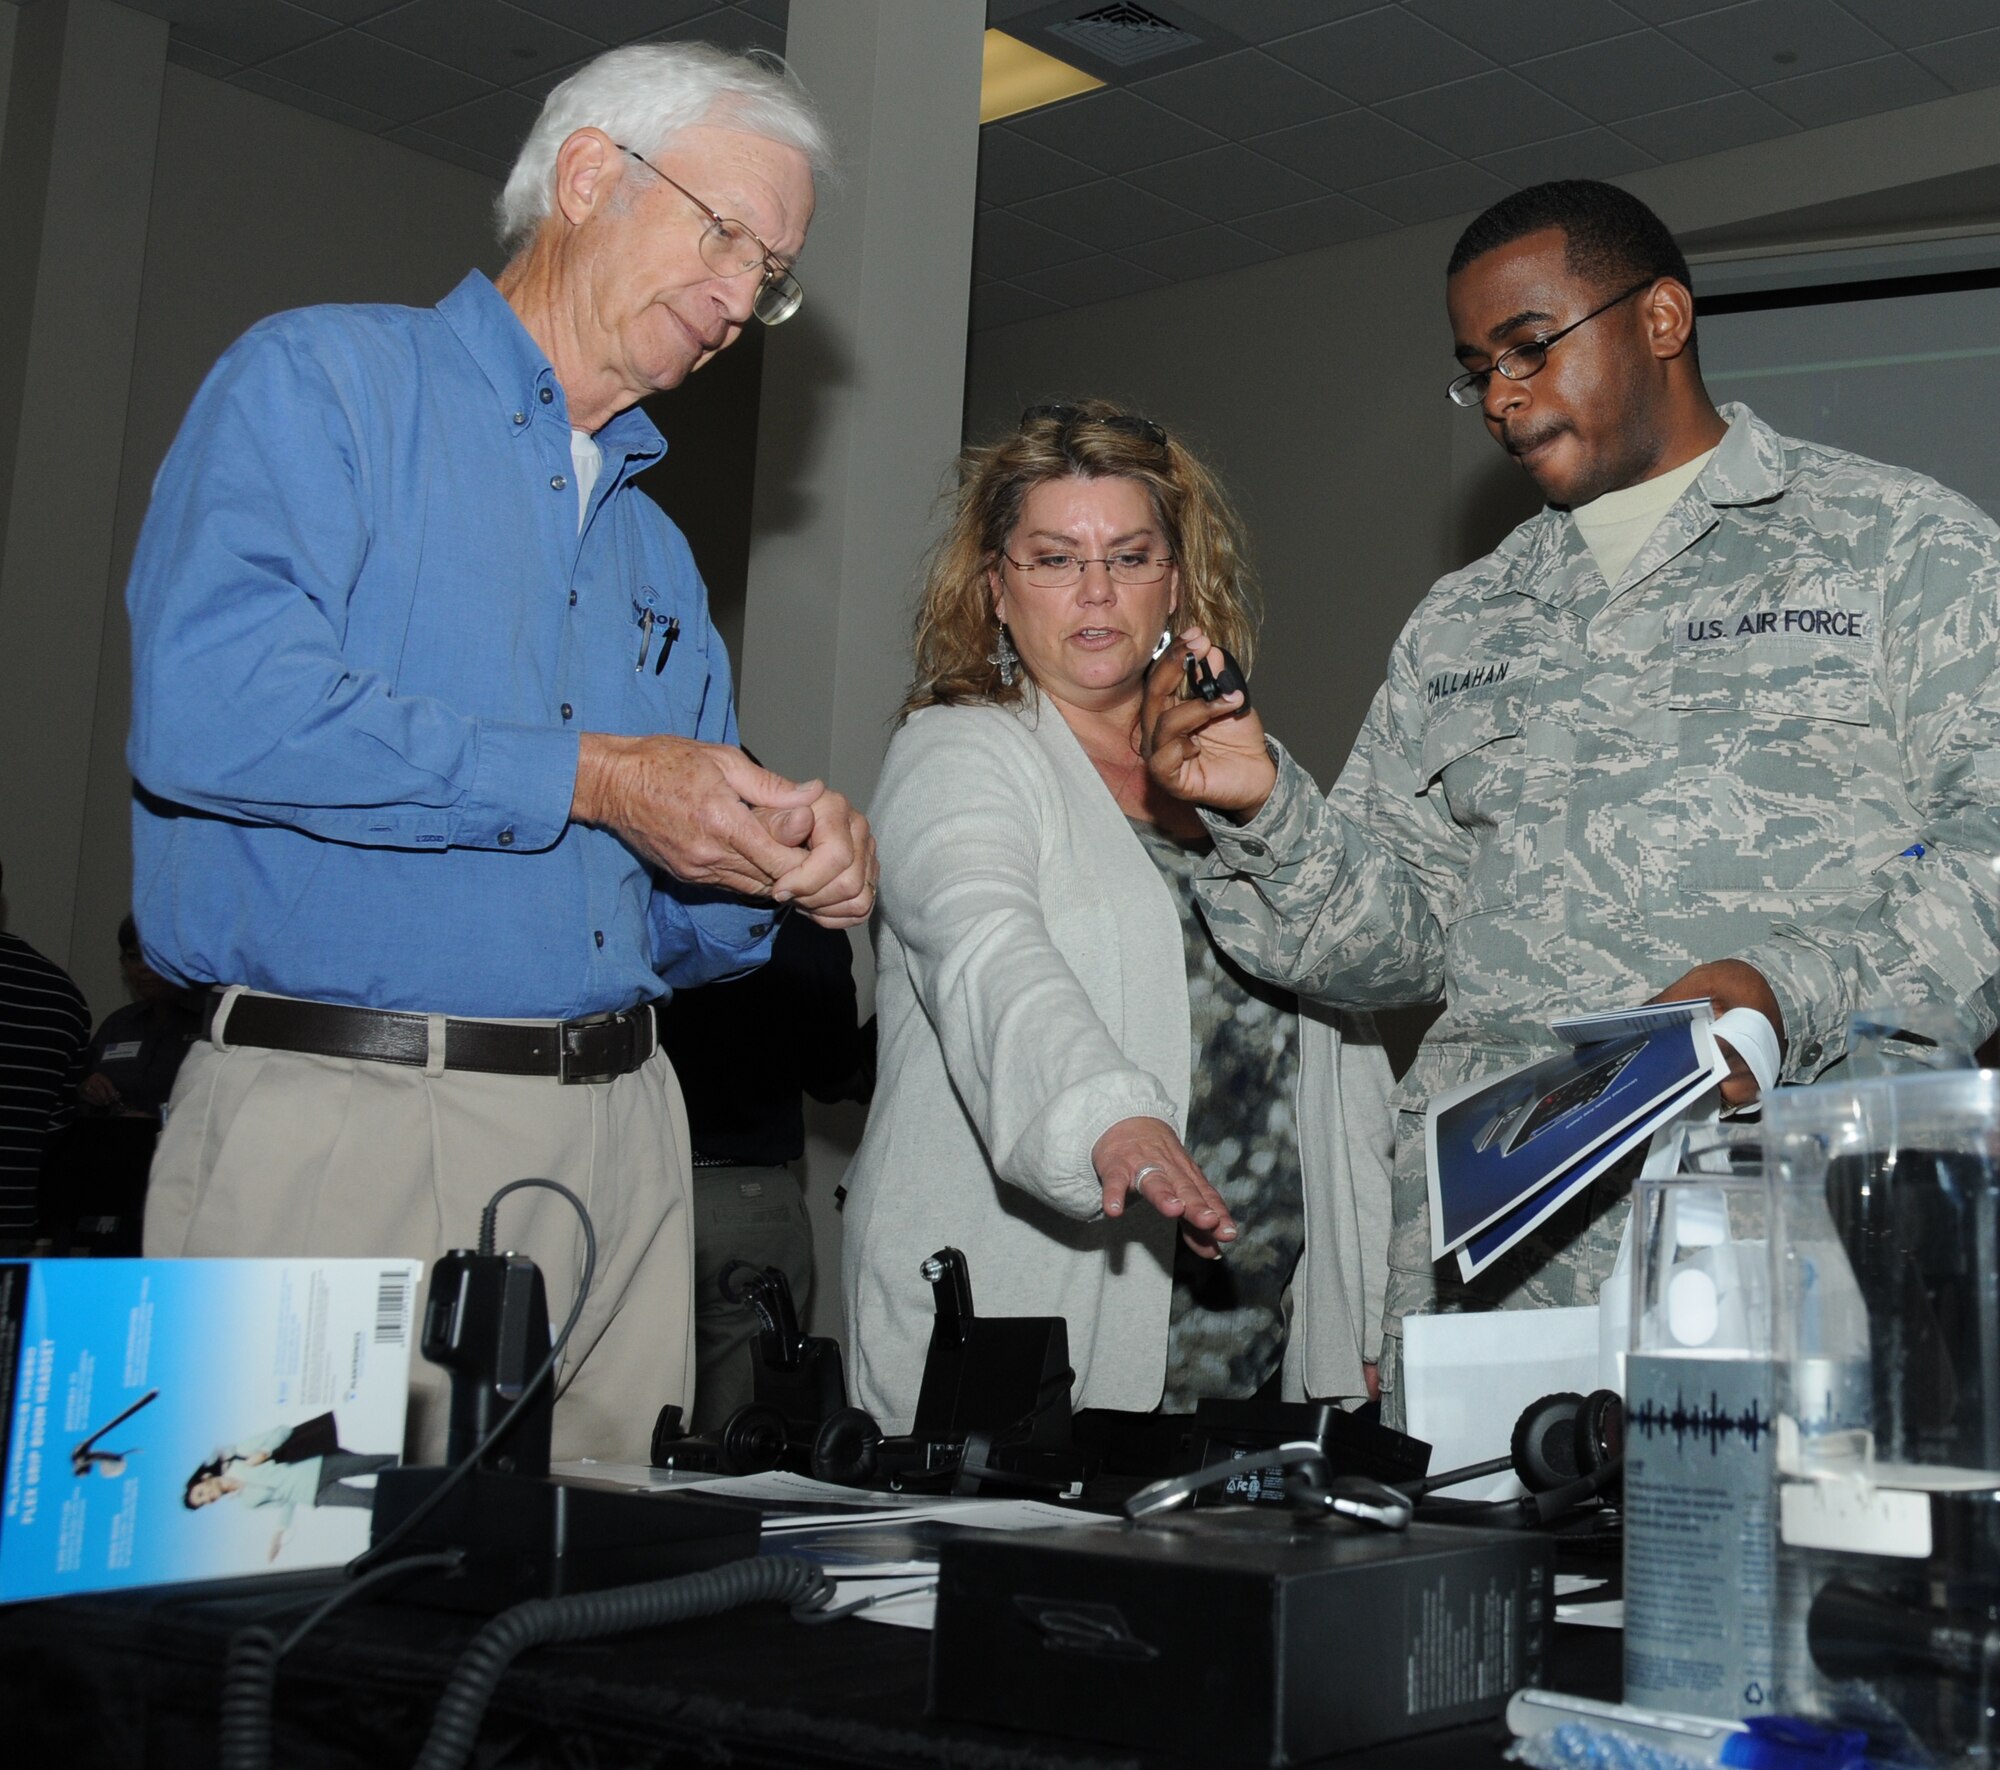 Charles Green and Sheryl Barrios, Plantronics sales representatives, describes the hands-free sound and voice equipment used for communication to Staff Sgt. Vincent Callahan, 81st Training Support Squadron, during a technology expo Jan. 9, 2012, at the Roberts Consolidated Aircraft Maintenance Facility, Keesler Air Force Base, Miss.  The 17th annual free expo, hosted by the 81st TRSS, featured more than 40 exhibitors.  (U.S. Air Force photo by Kemberly Groue)